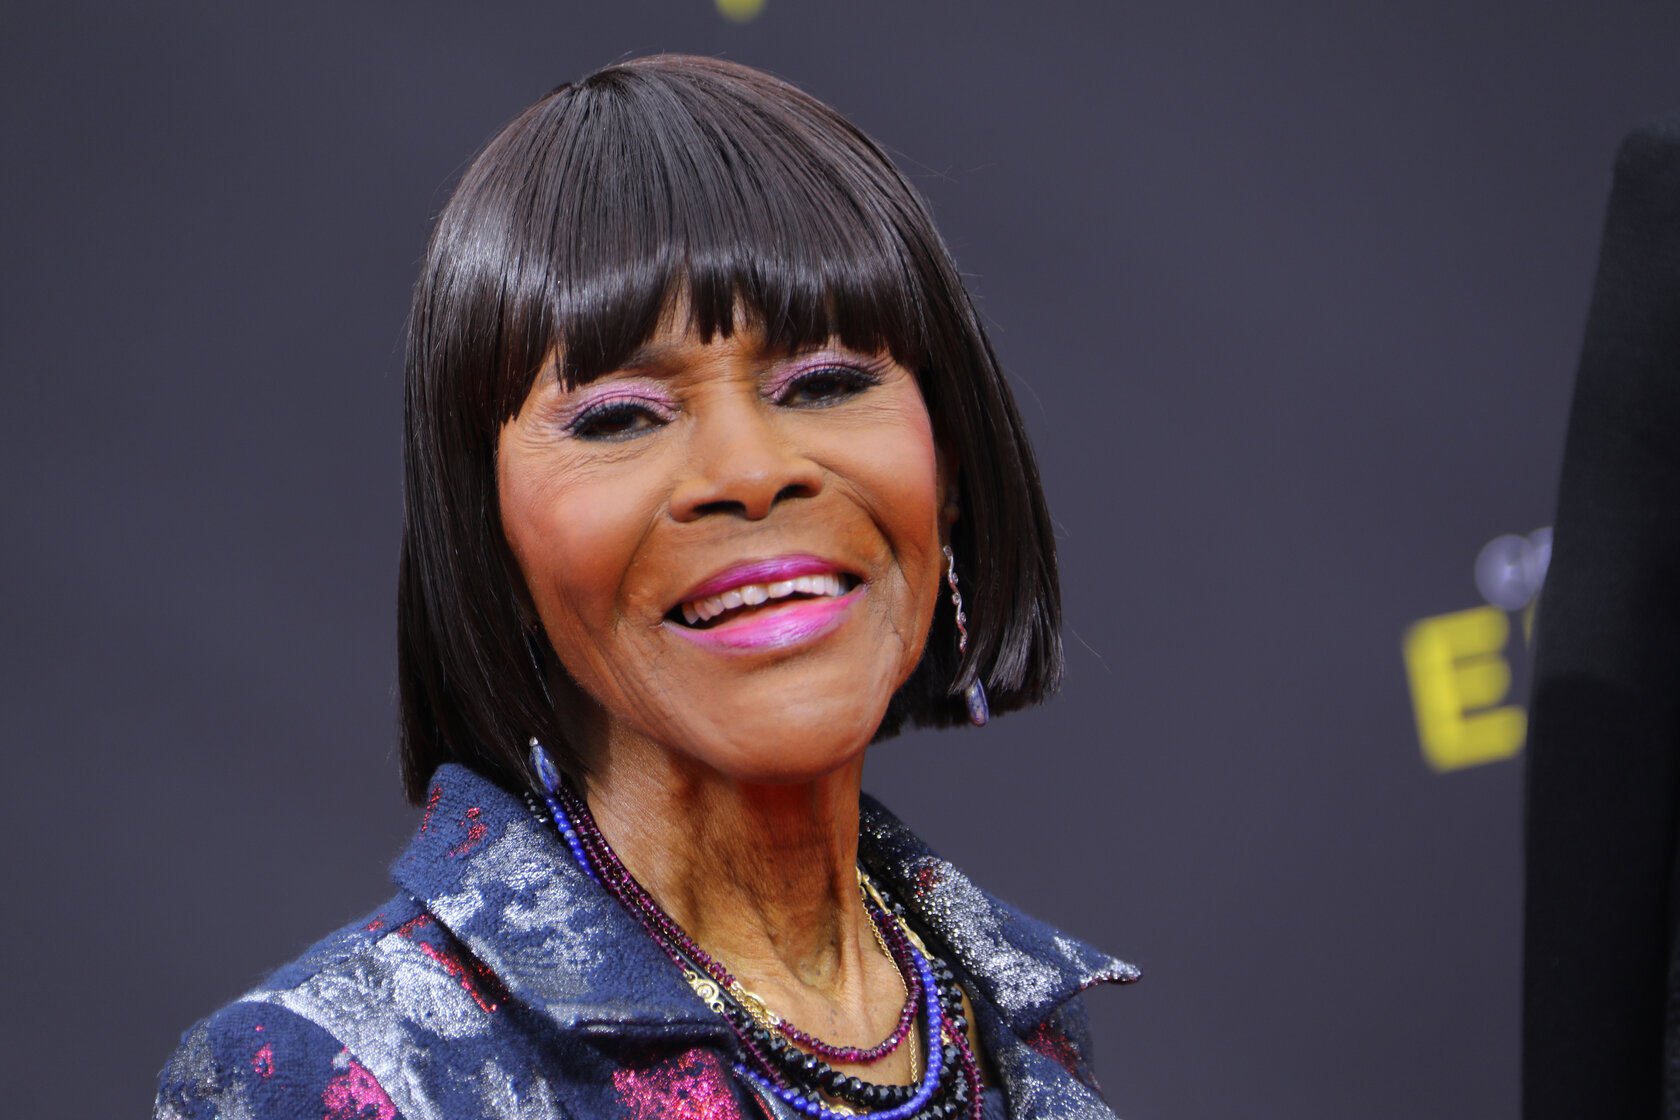 Cicely Tyson posing for a photograph on the red carpet.